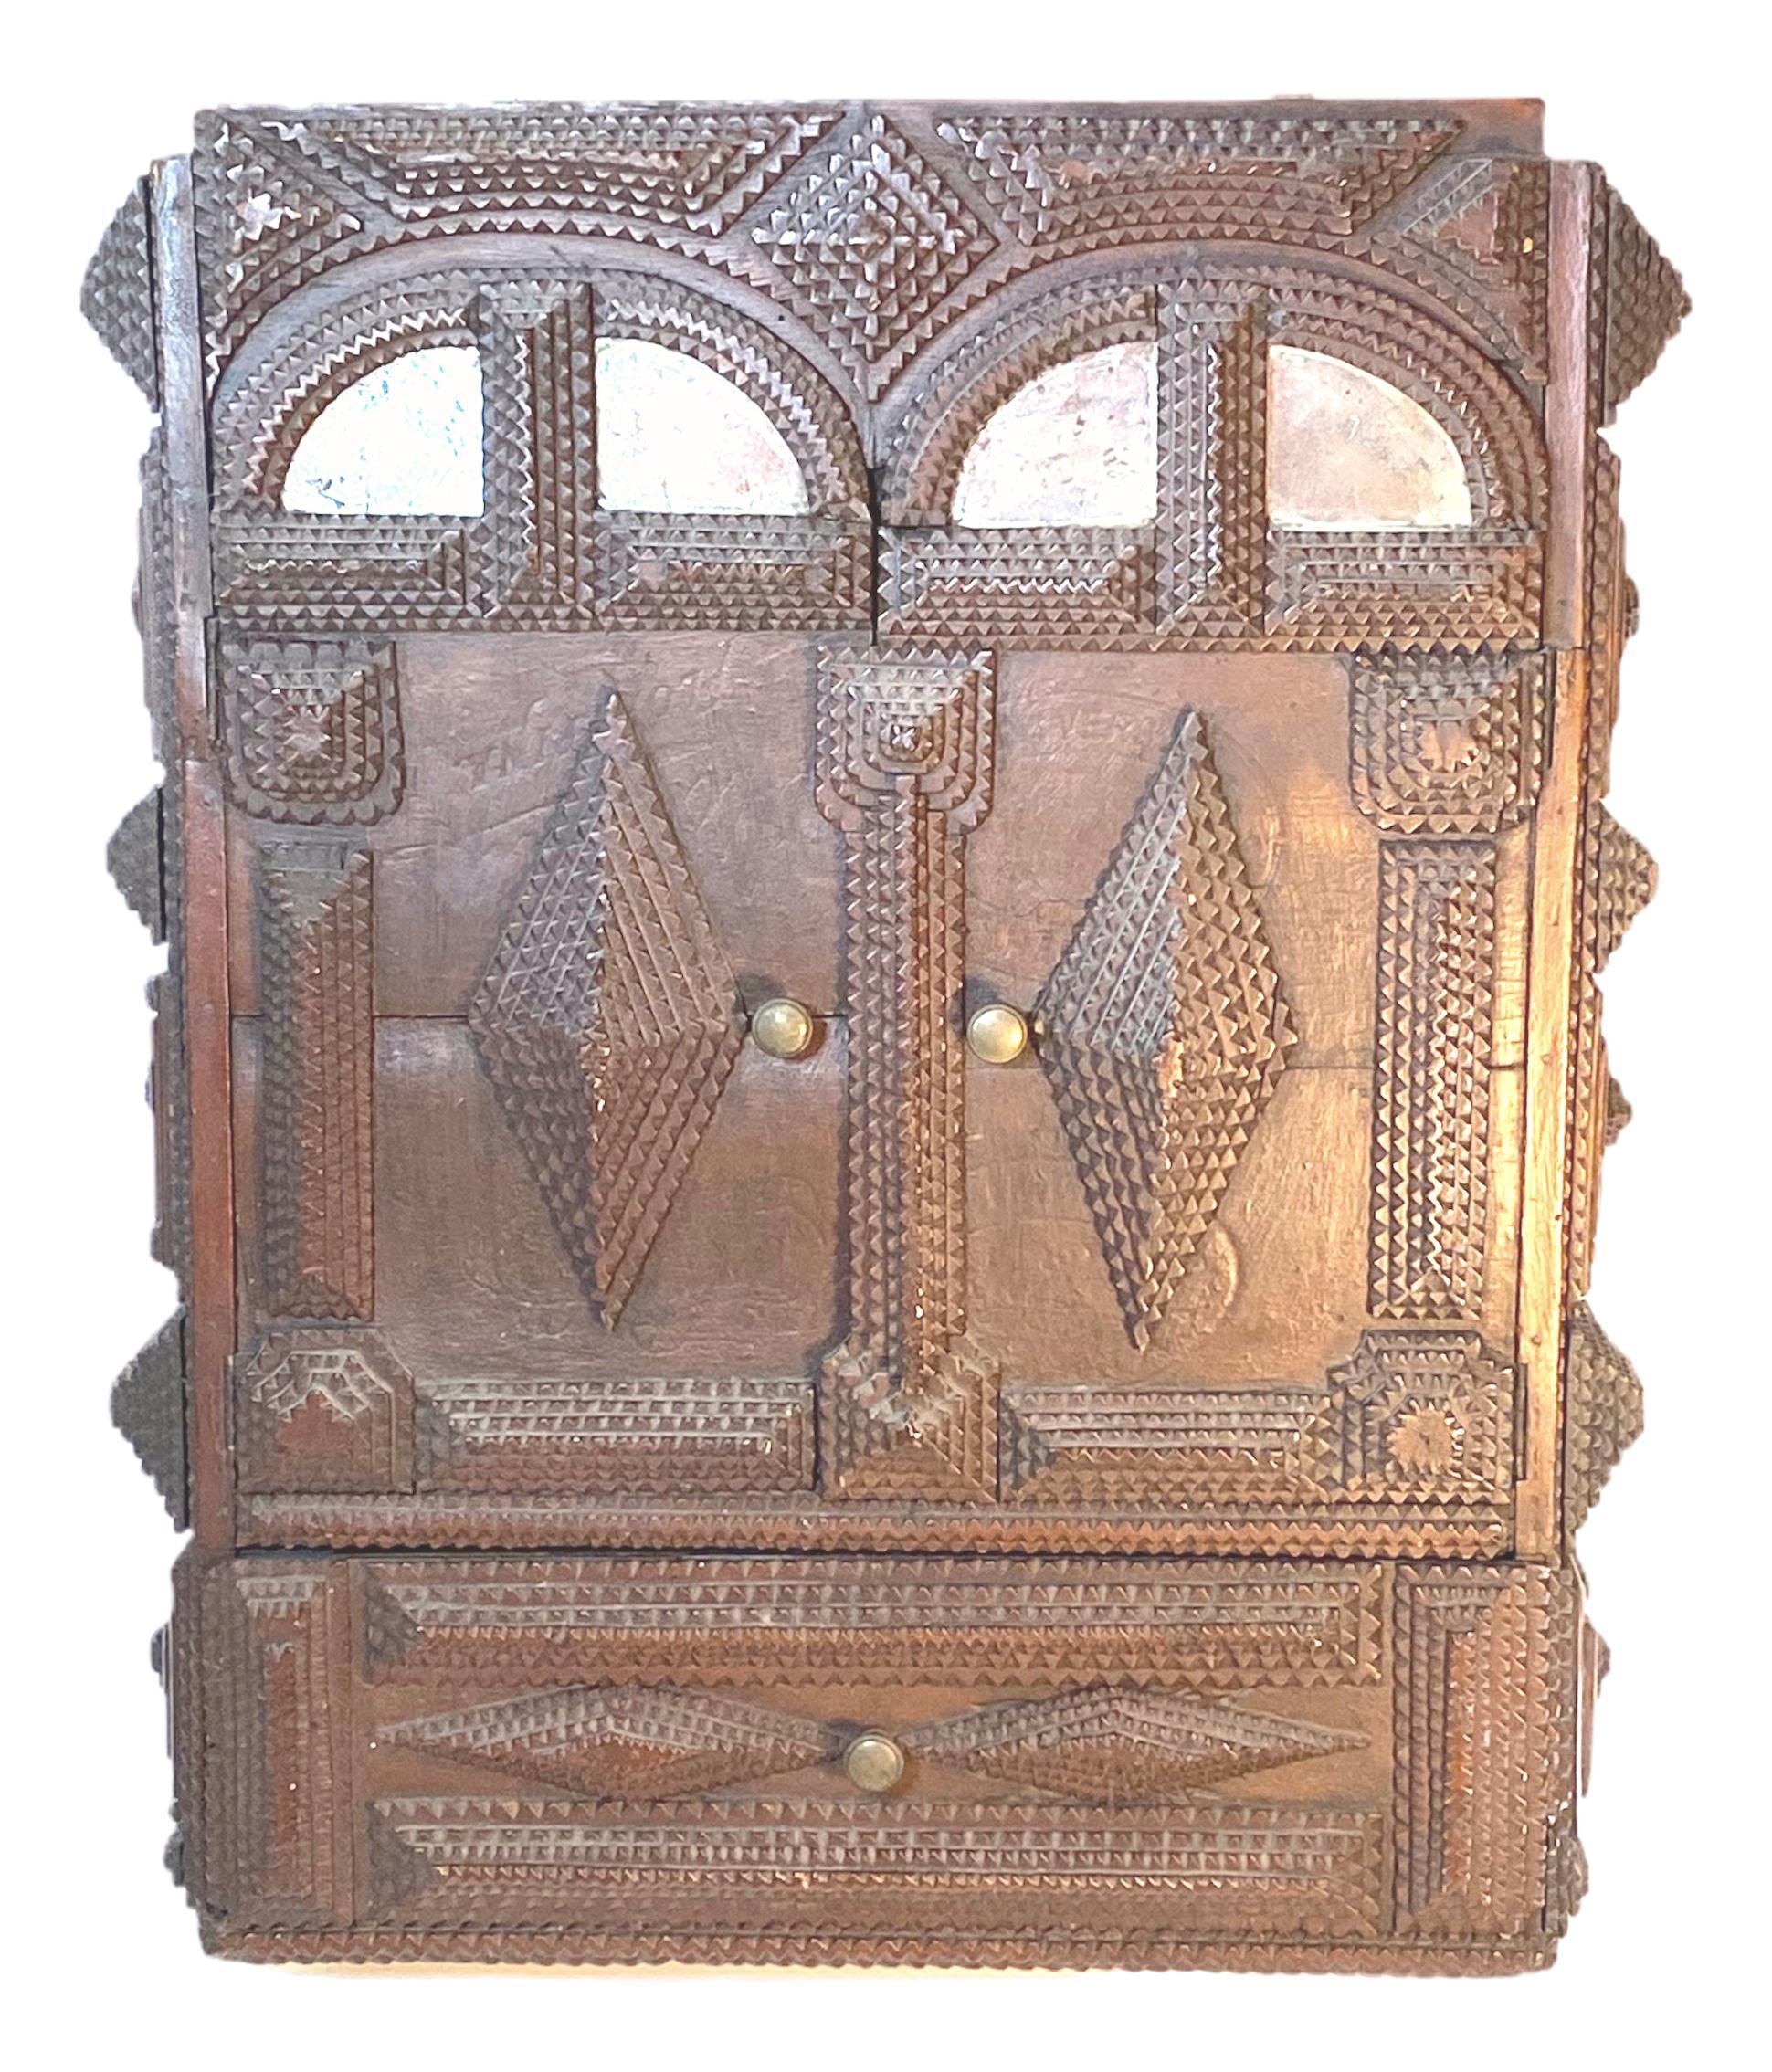 A petite German late 19th century Tramp Folk Art Wall Cupboard Cabinet. This petite Folk Art piece, circa 1880 comes from Germany and features a finely carved work with distressed Mirrors.
 It is a great example of the Tramp Art style, an art